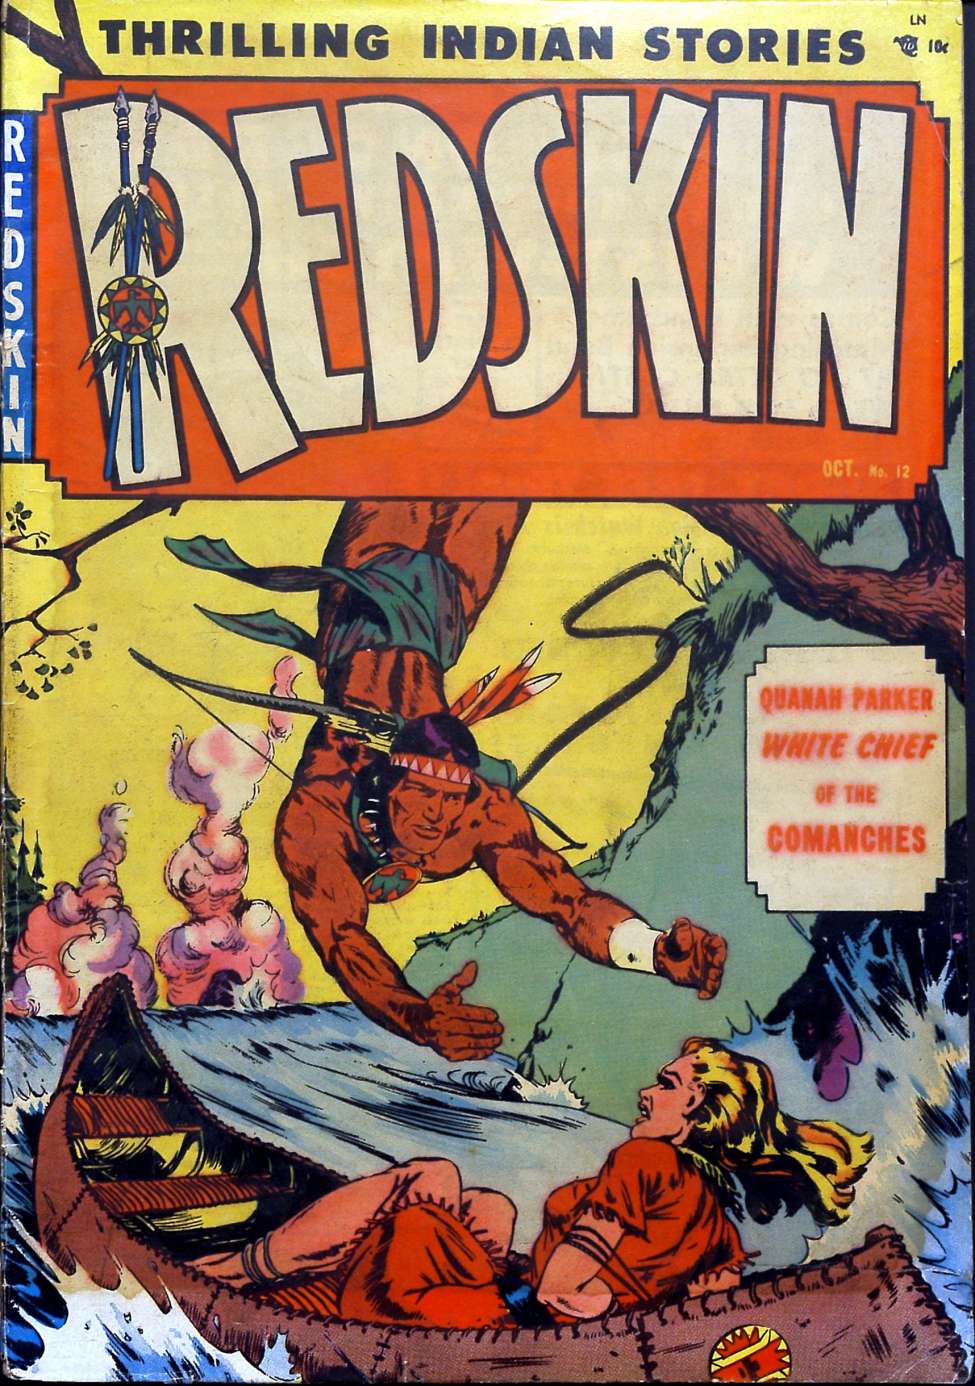 Book Cover For Redskin 12